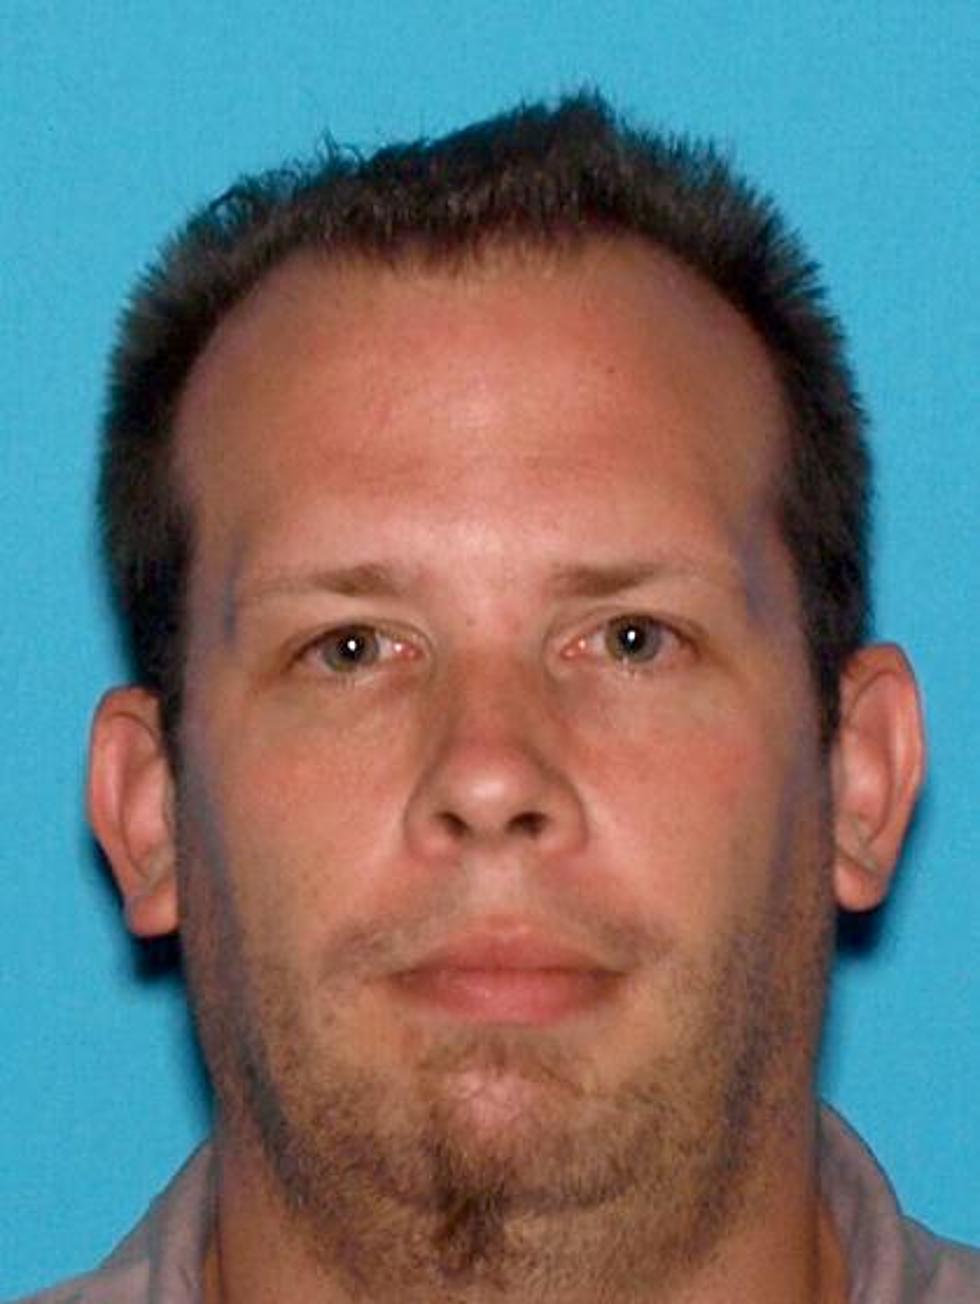 Burlington County man arrested for luring Jersey Shore teenager